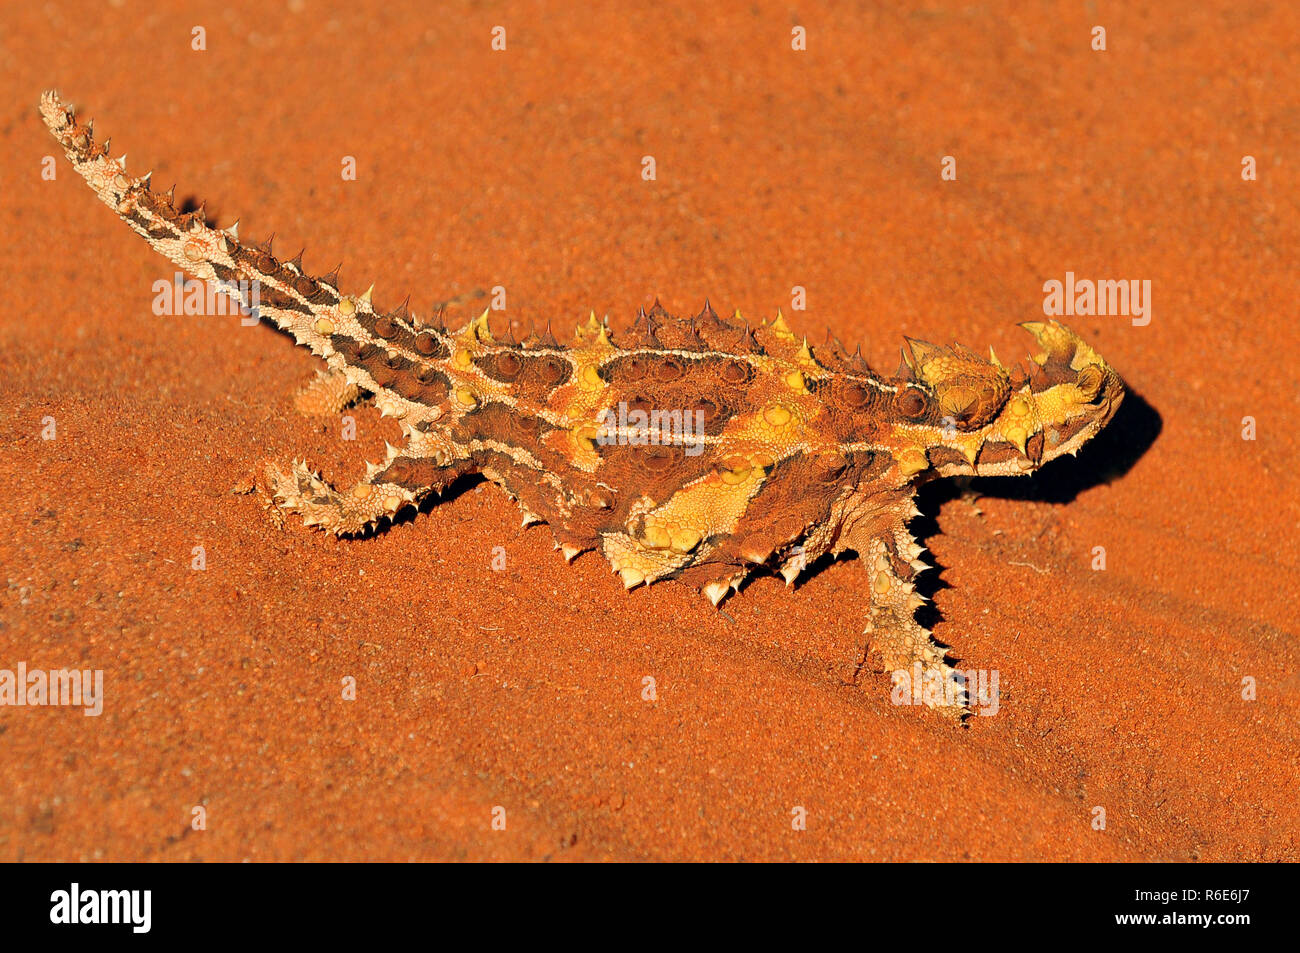 The Thorny Devil Or Thorny Dragon (Moloch Horridus) Is An Australian Lizard, Also Known As The Mountain Devil, The Thorny Lizard, Or The Moloch, Uluru Stock Photo